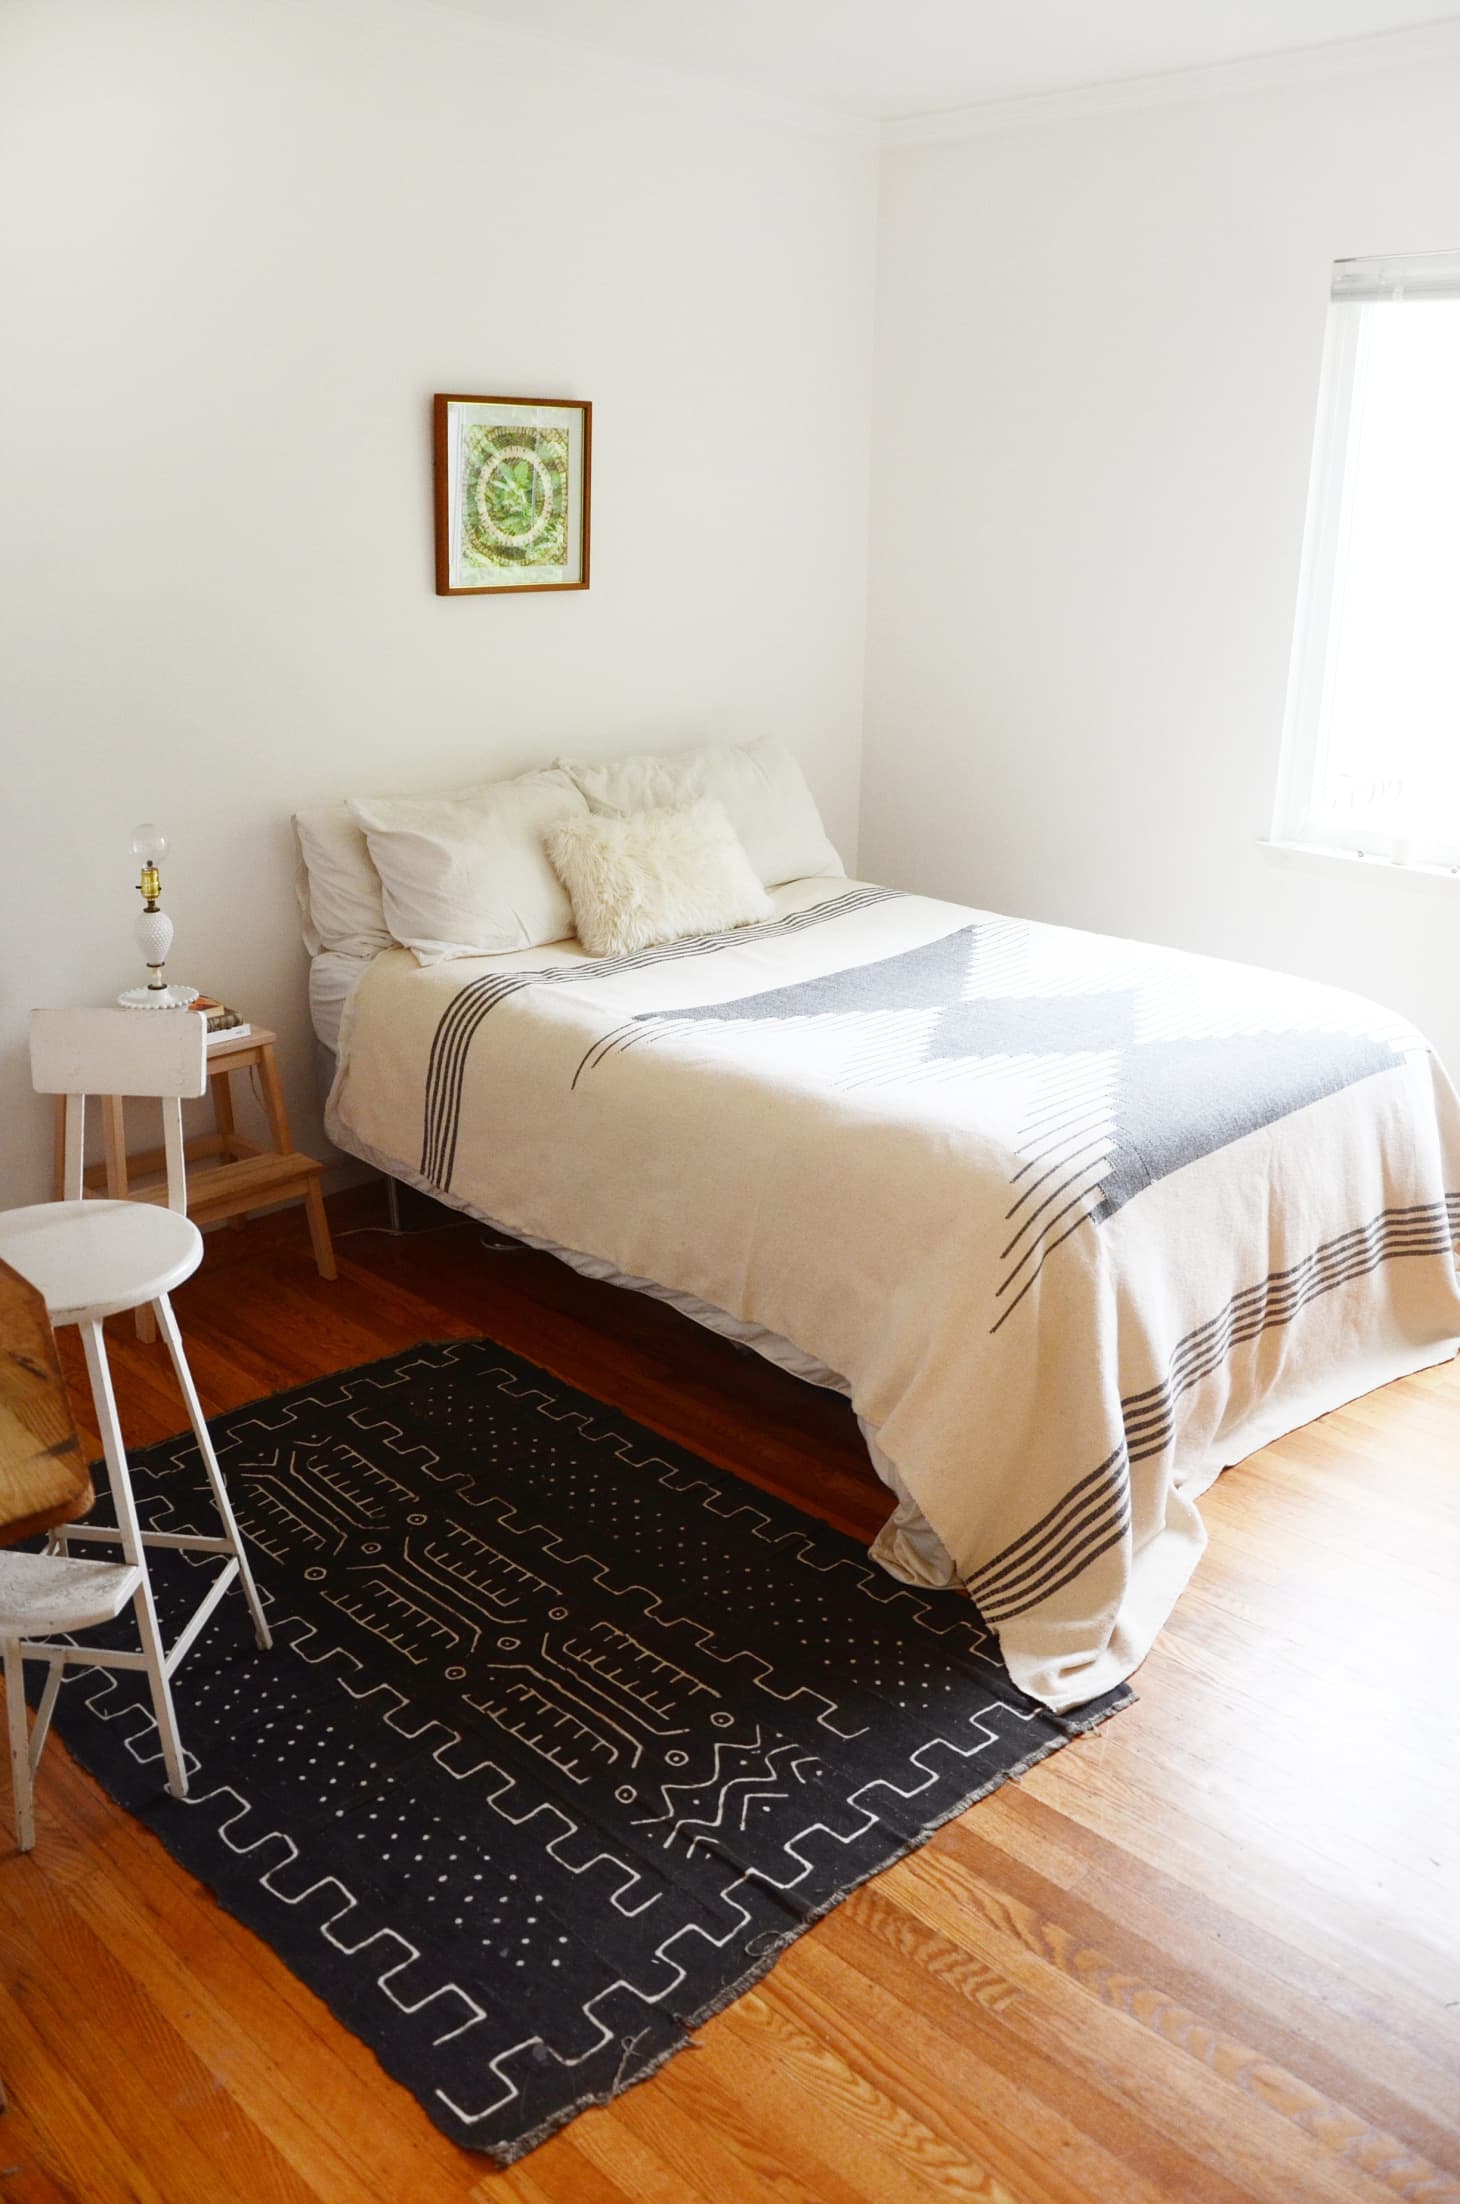 Tour: Roommates Share a Plant-Filled Oakland Apartment | Apartment Therapy